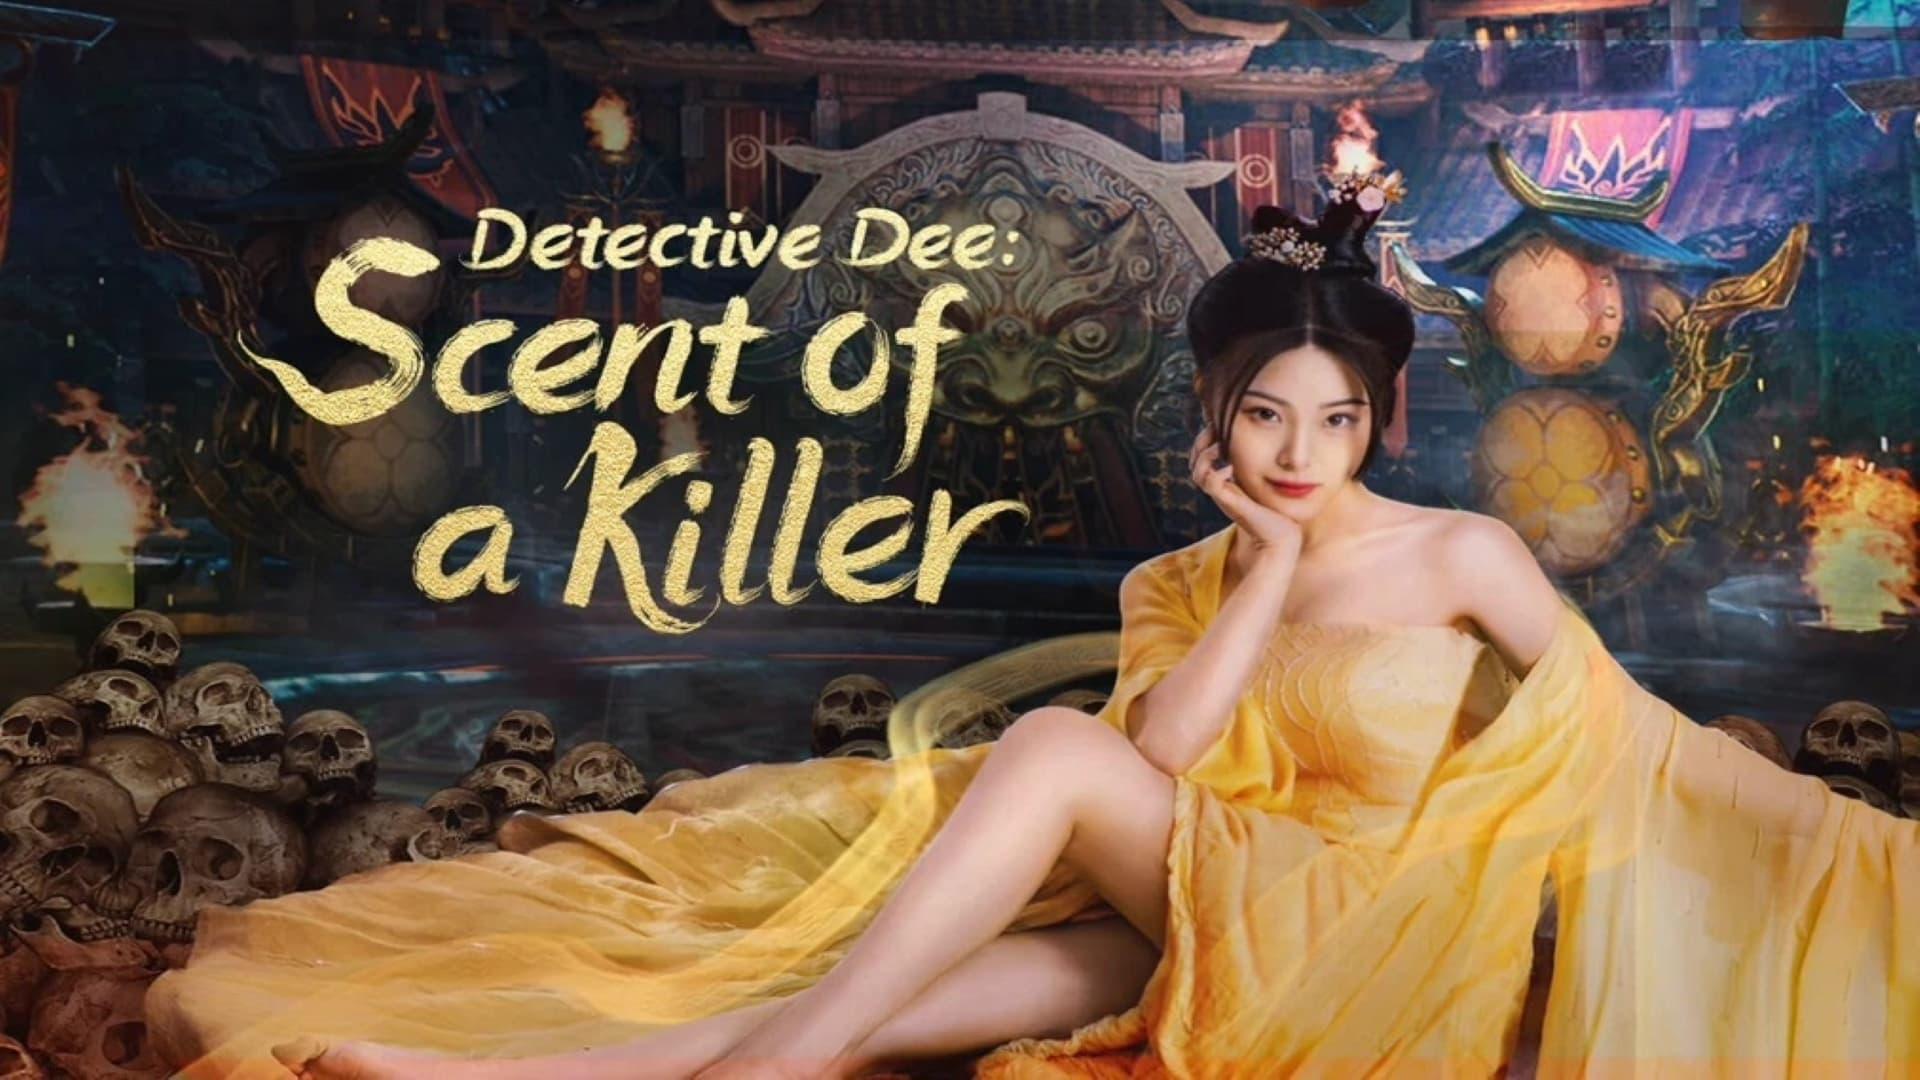 Detective Dee and Deadly Fragrance backdrop